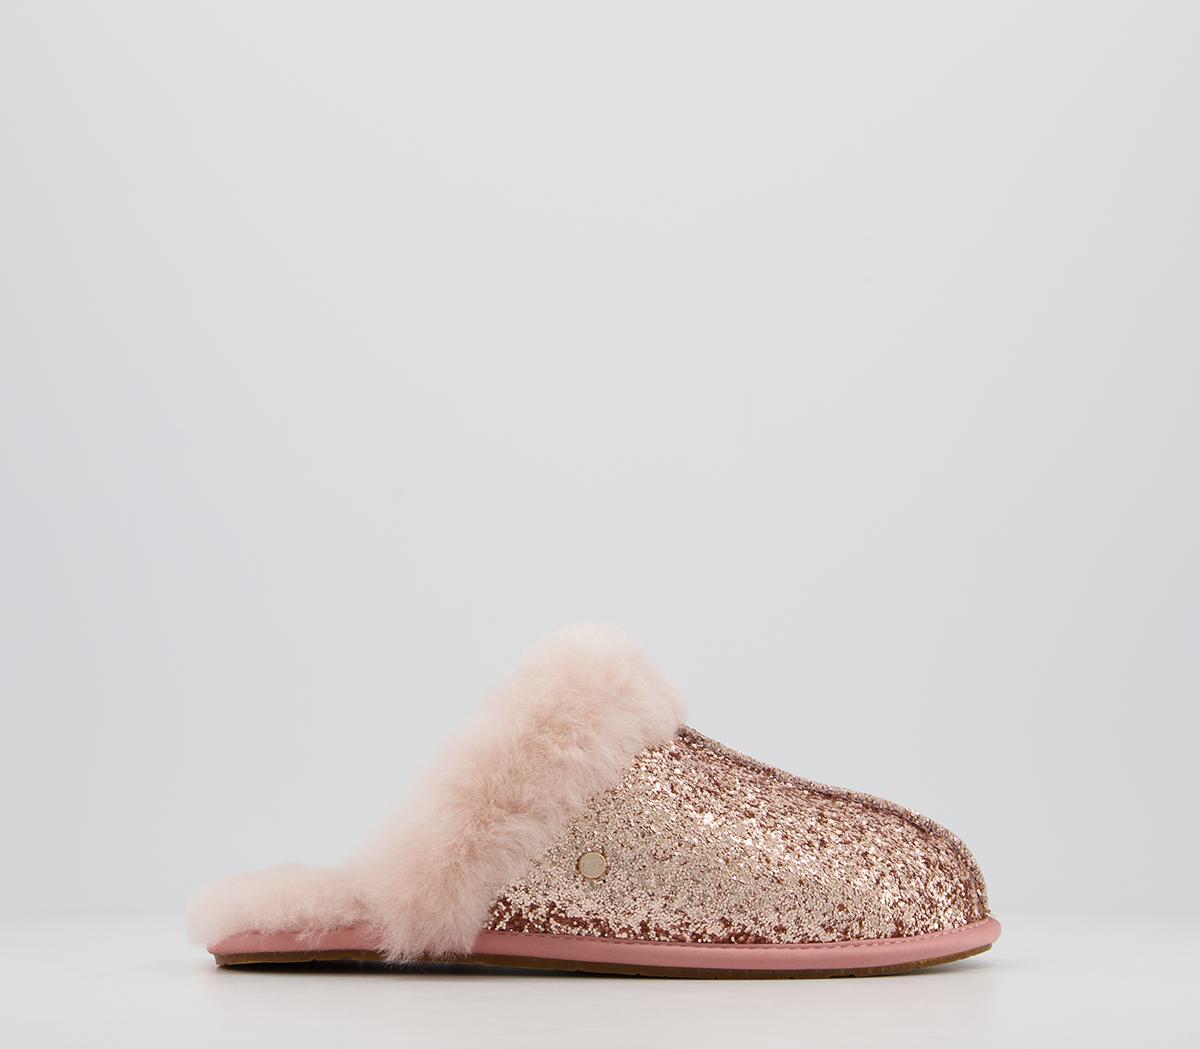 slippers rose gold